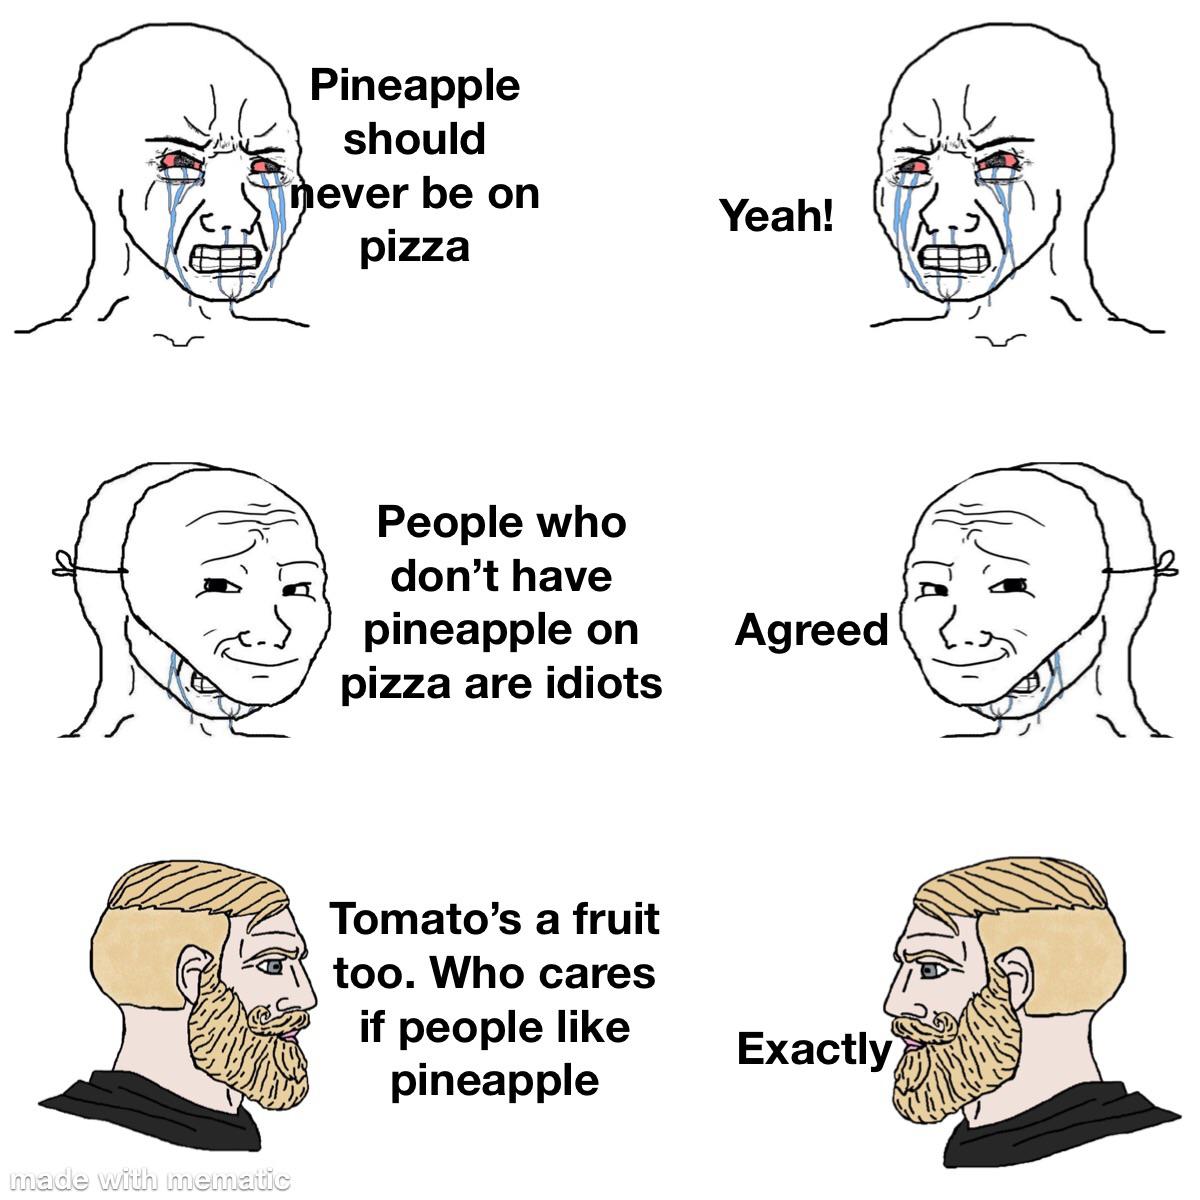 chad talking to chad meme - Pineapple should never be on pizza Yeah! fo People who don't have pineapple on pizza are idiots Agreed Tomato's a fruit a too. Who cares if people pineapple Exactly made with mematic